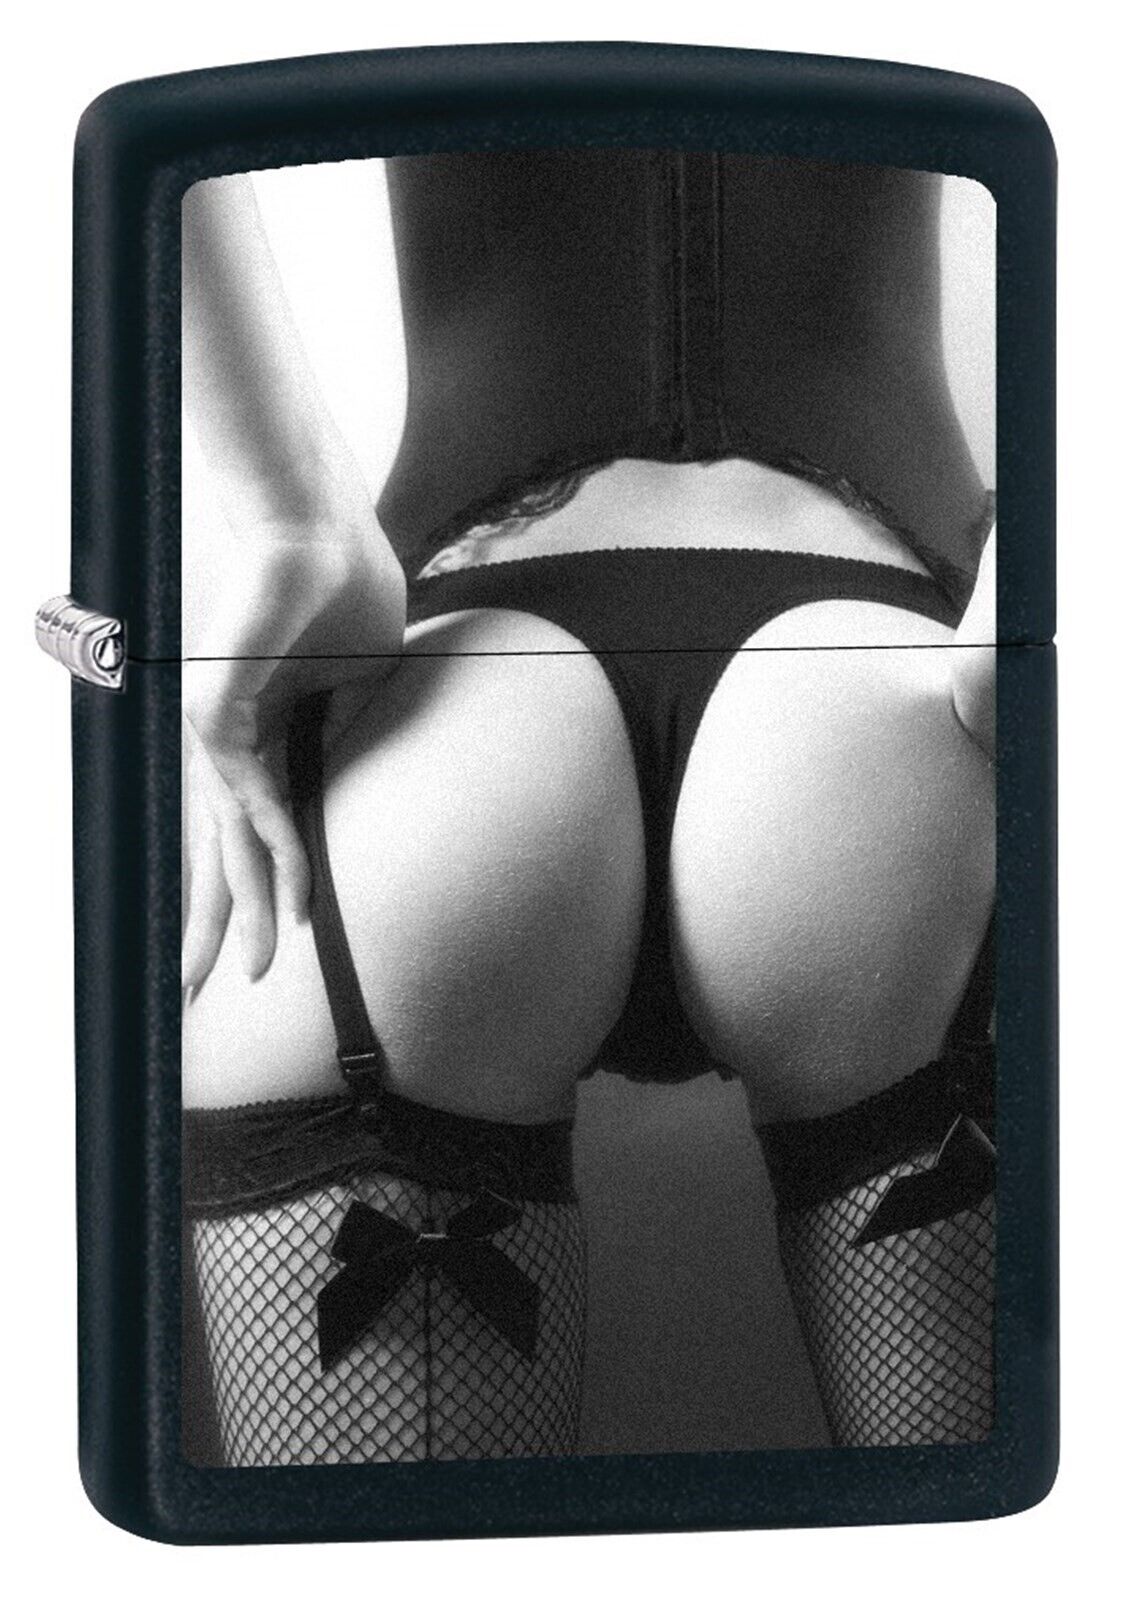 Zippo Lighter, Midnight Girl Collection - View From Behind #1 - Black Matte